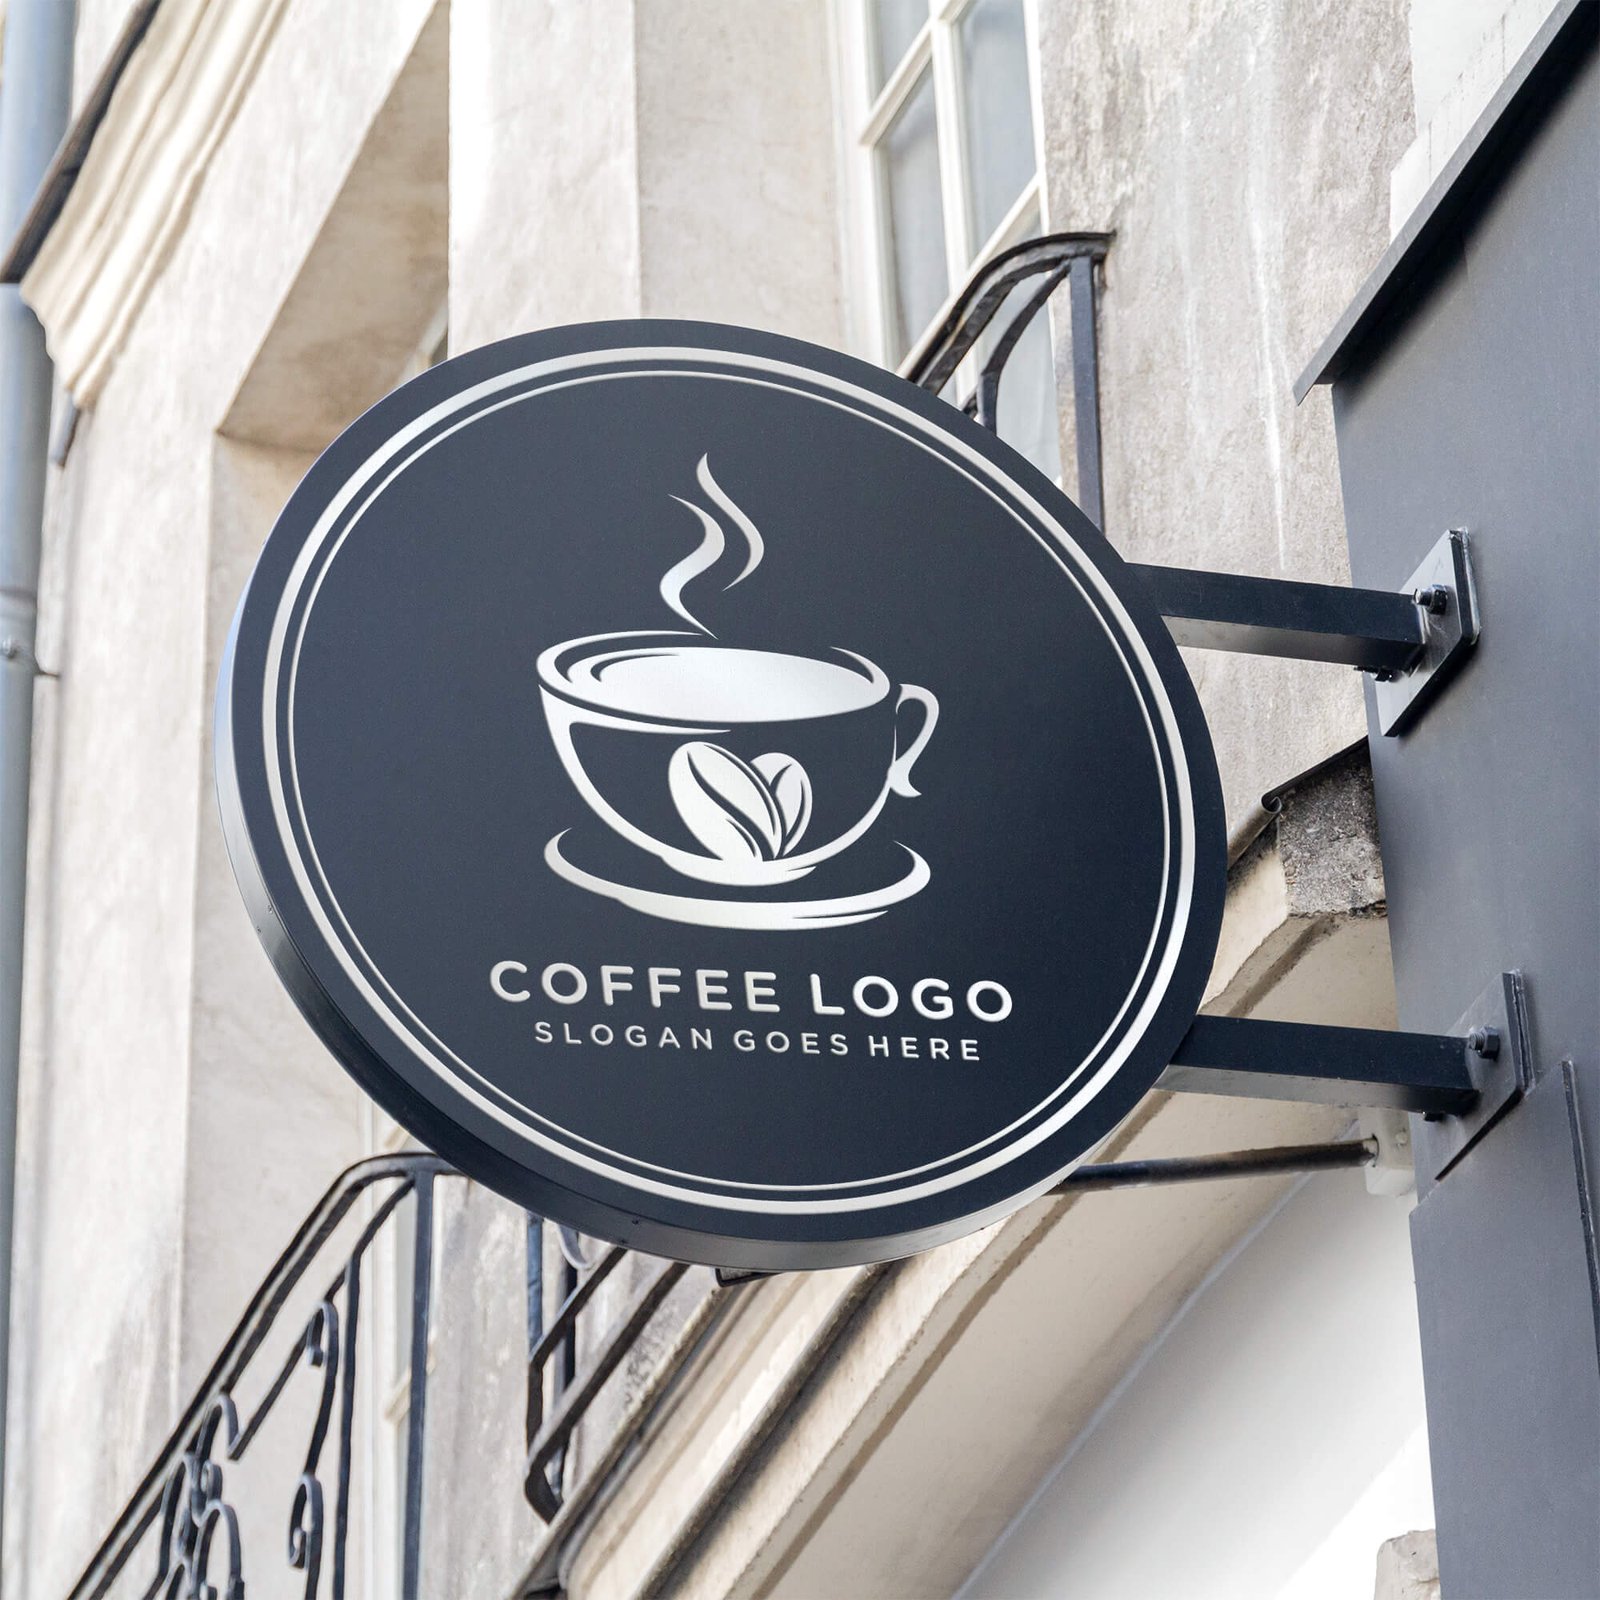 Free Cafe Round Signboard Mockup PSD Template